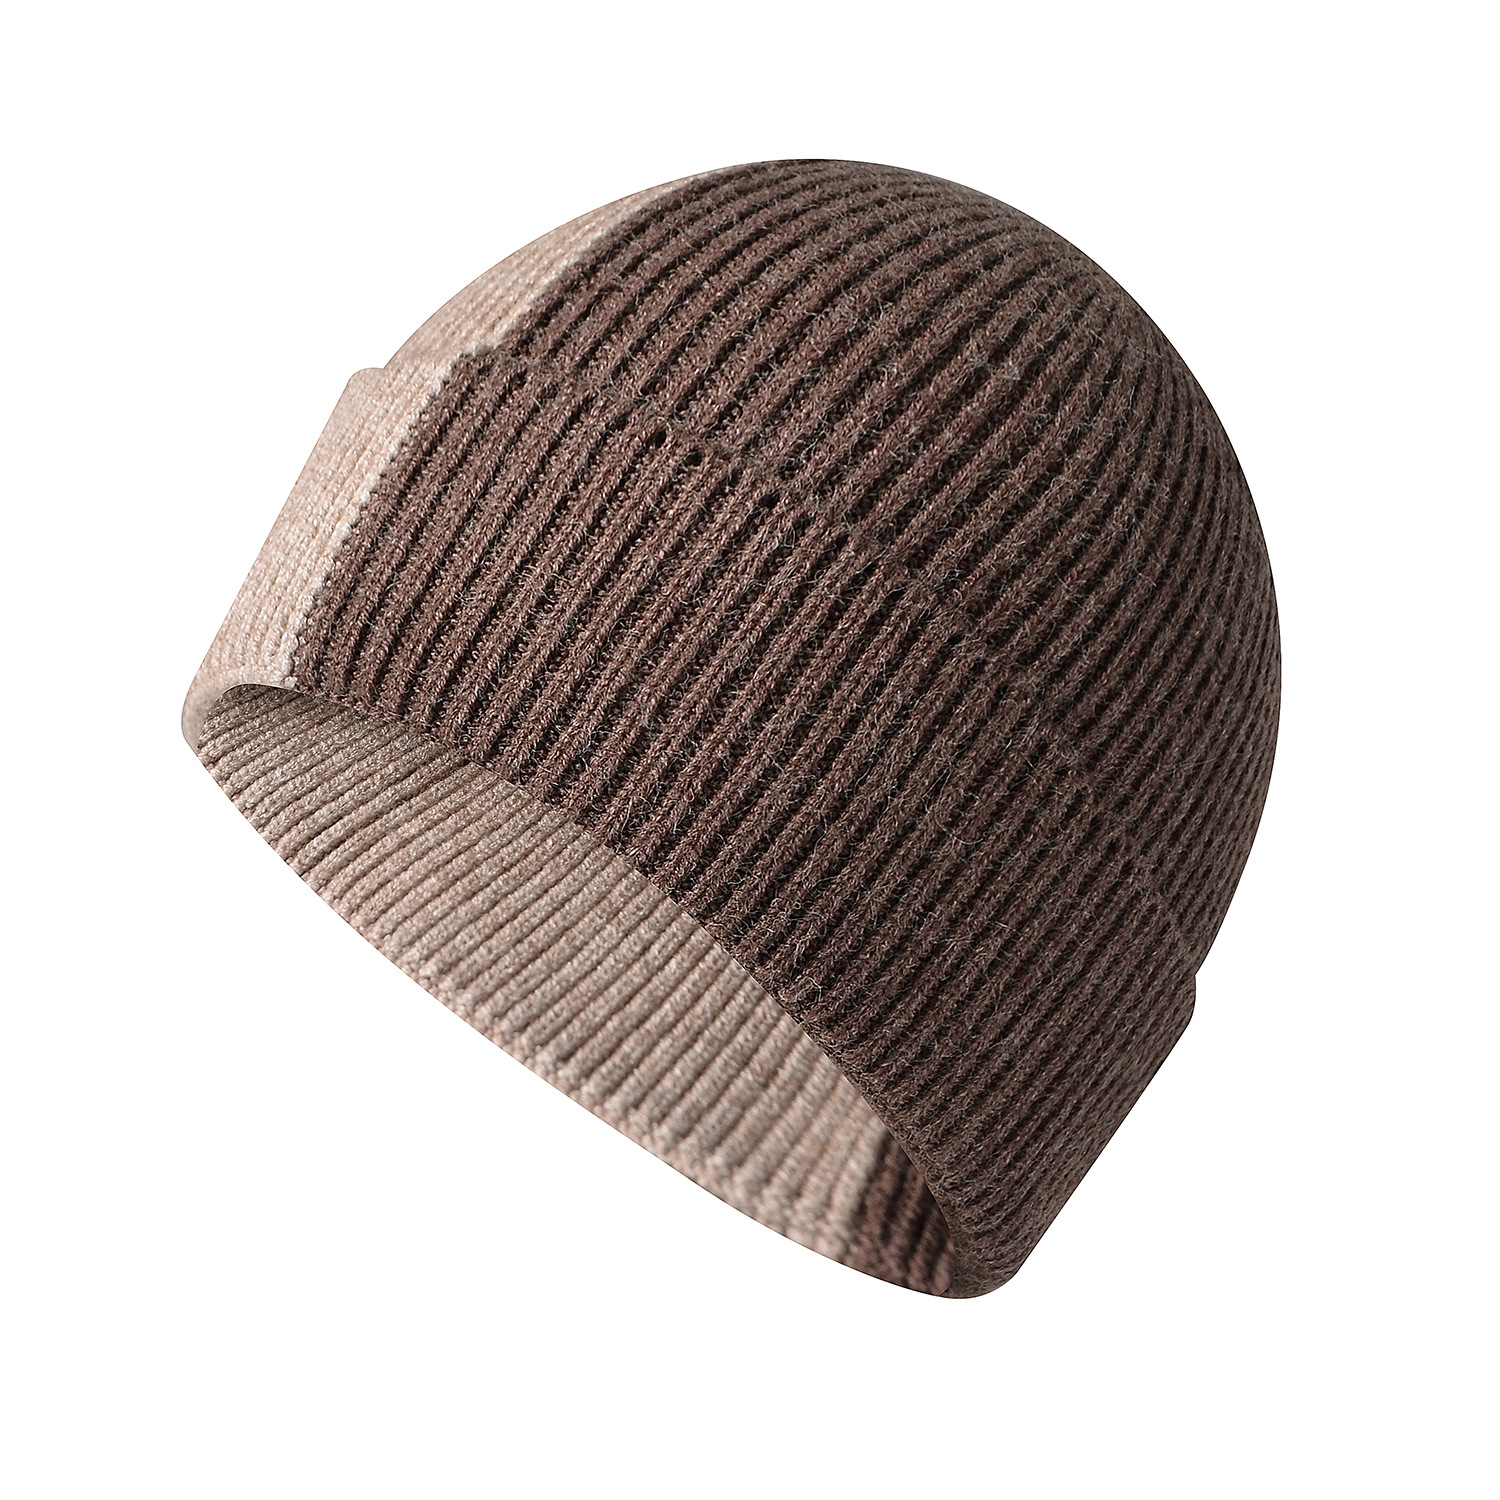 Autumn and Winter New Fashion Colorblock Knitted Hat Women's Leisure Travel Hat Simple Sleeve Cap Core-Spun Yarn Woolen Cap